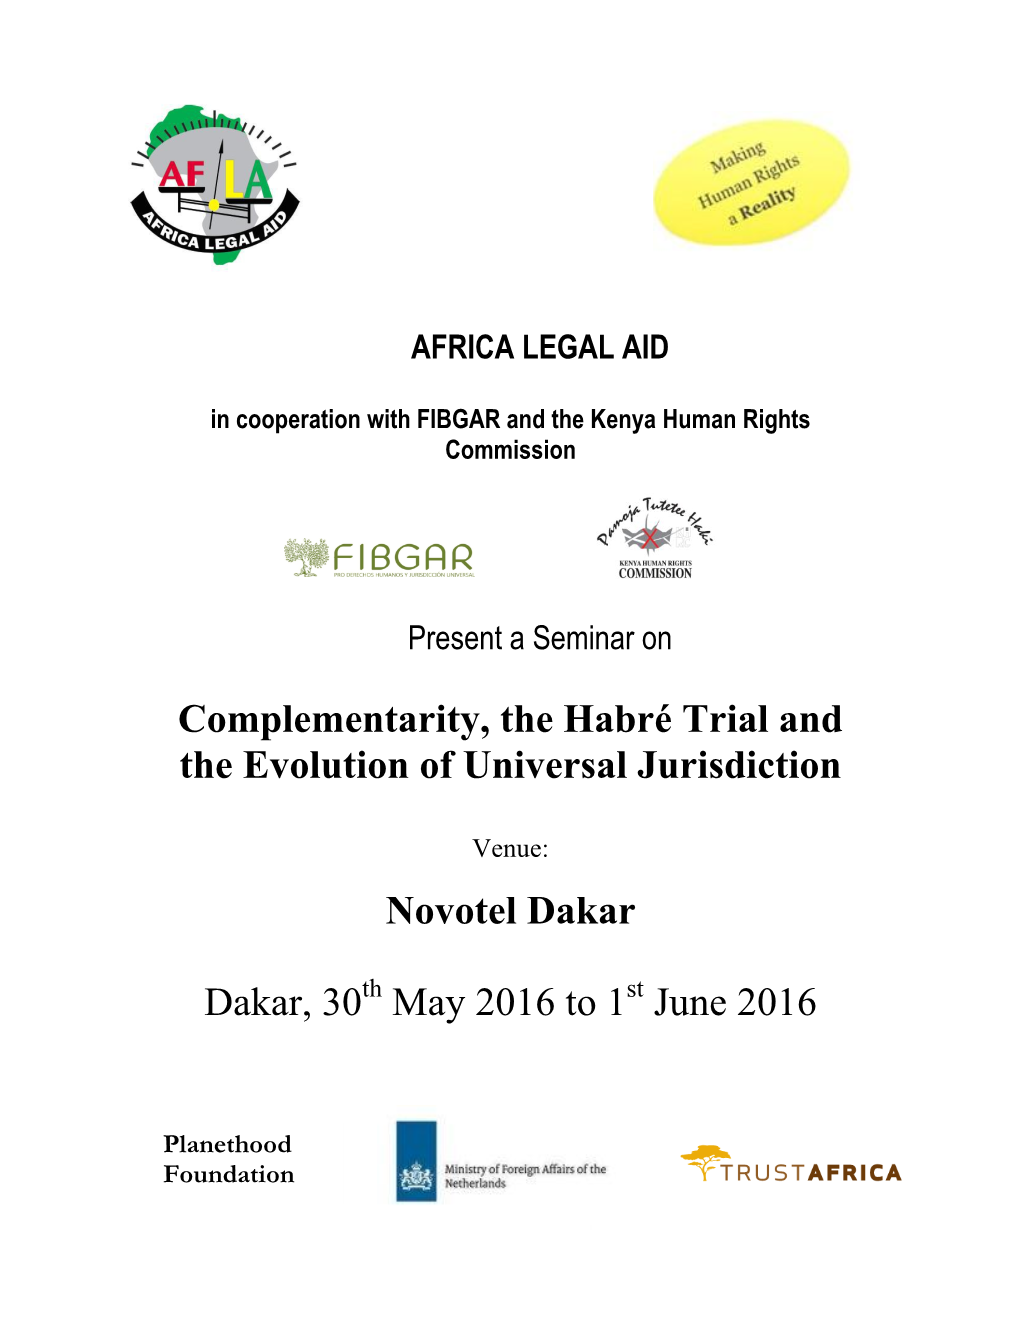 Complementarity, the Habré Trial and the Evolution of Universal Jurisdiction